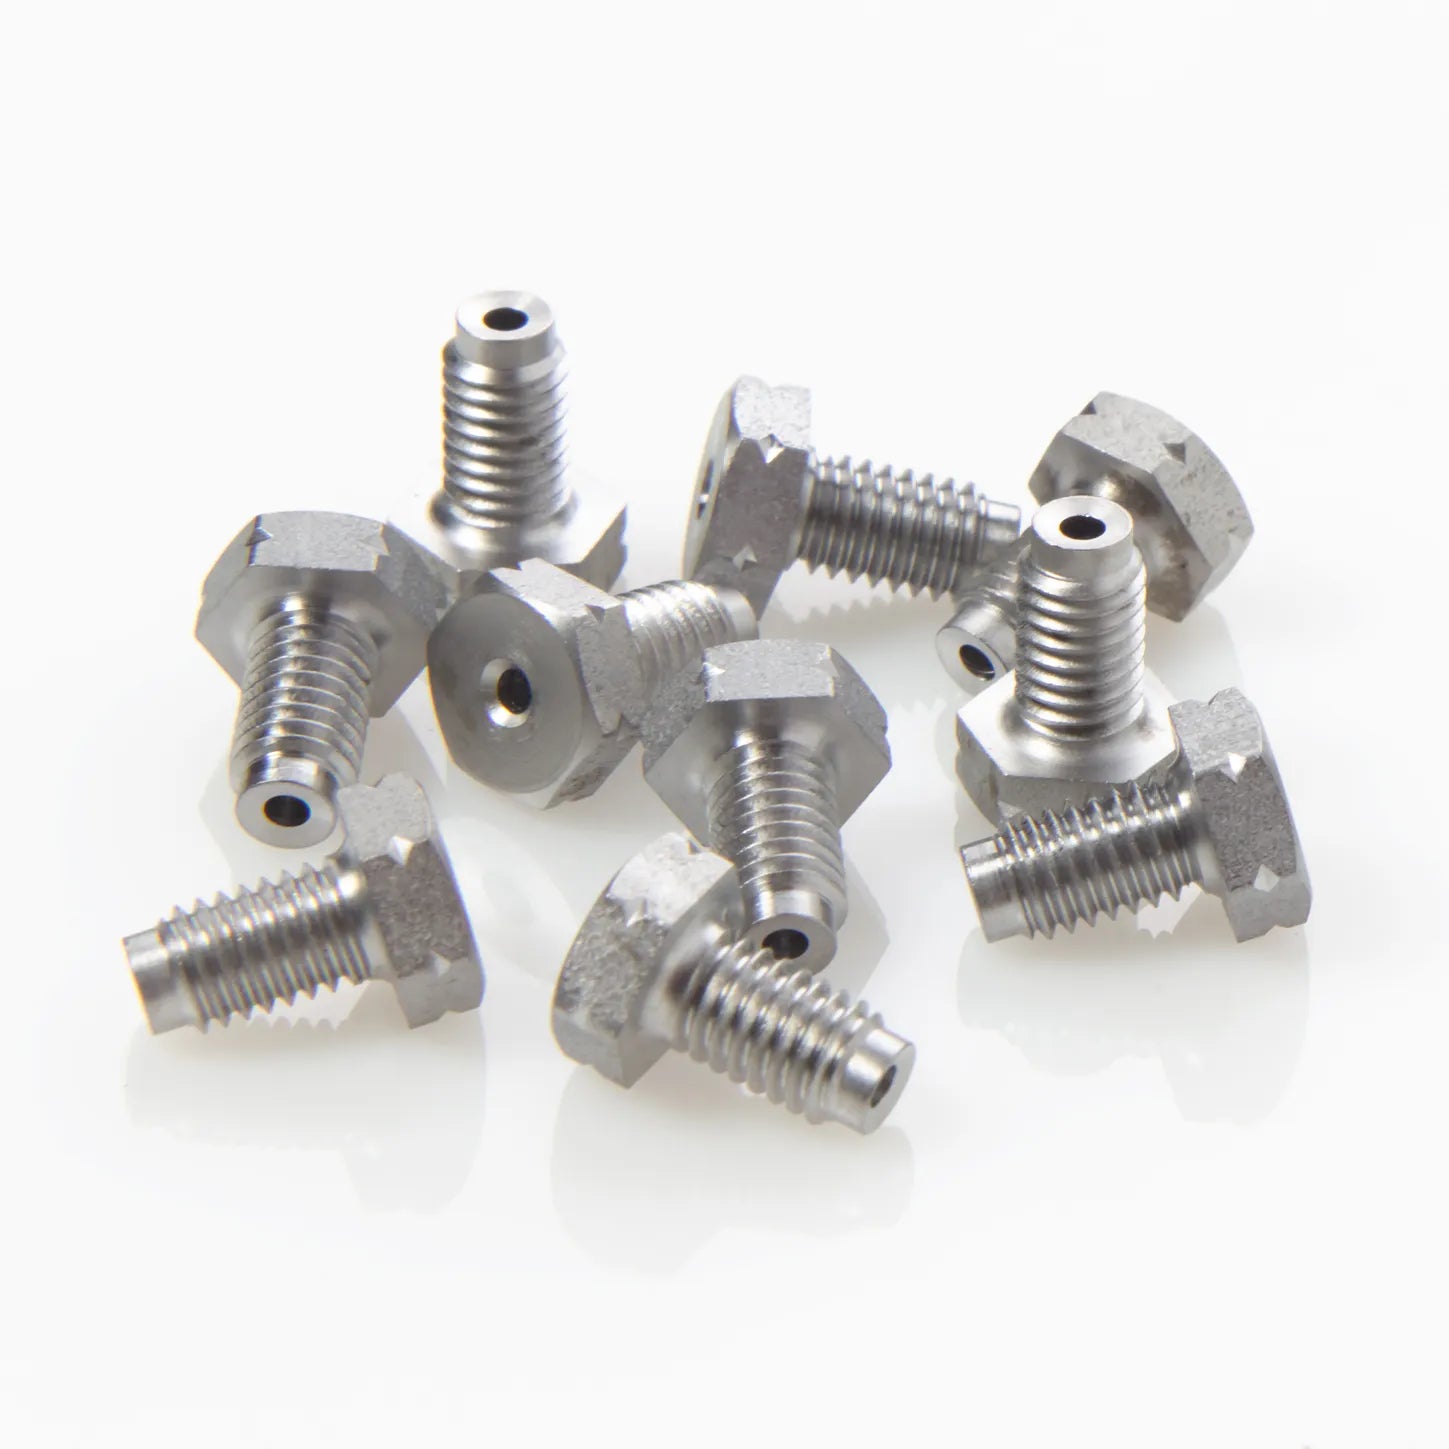 Compression Screw, 1/16", SS, 10/pk, Comparable to Waters # WAT005070